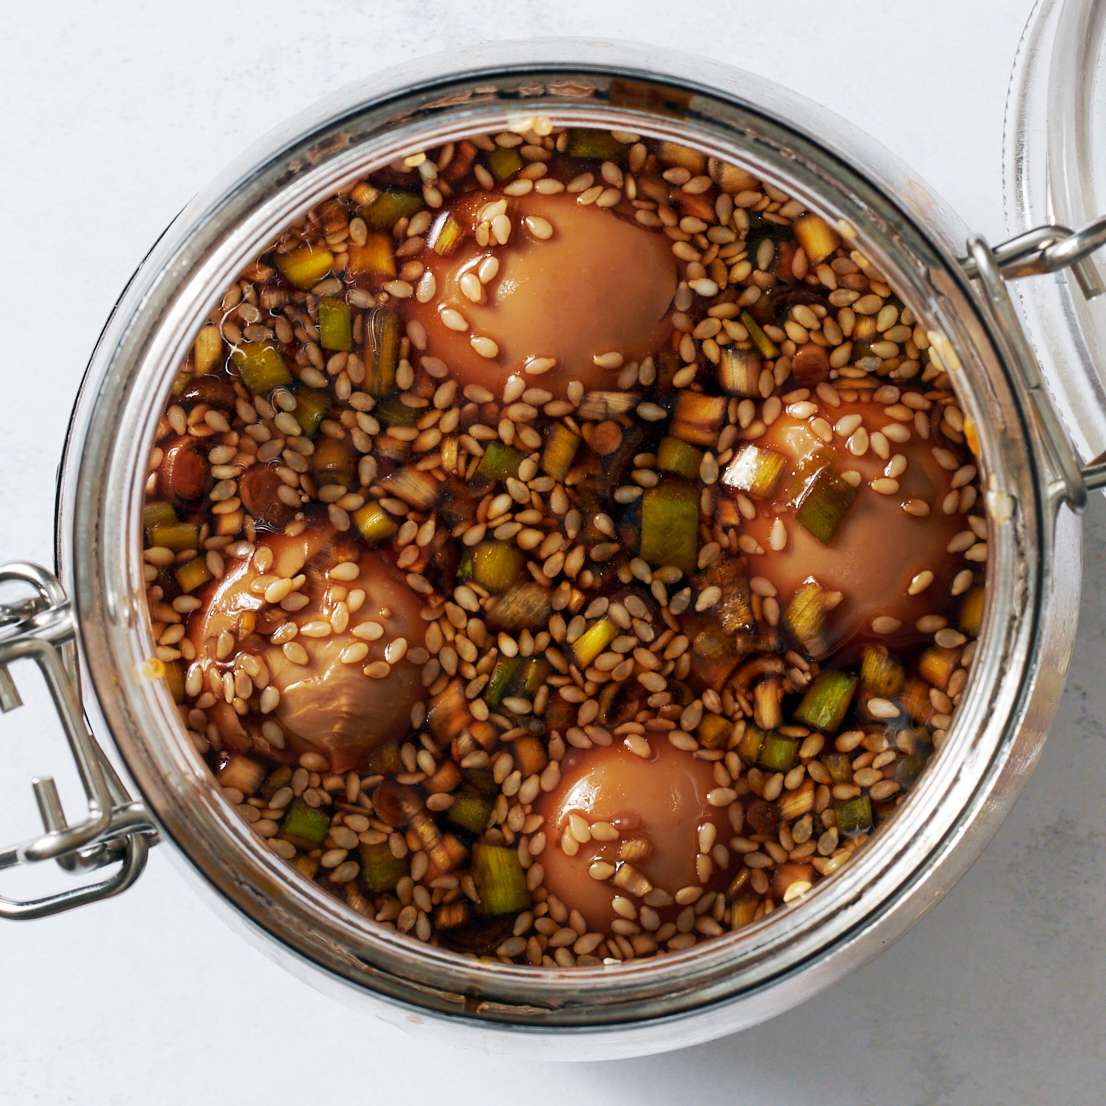 Hard boiled eggs covered with a soy sauce marinade in a jar